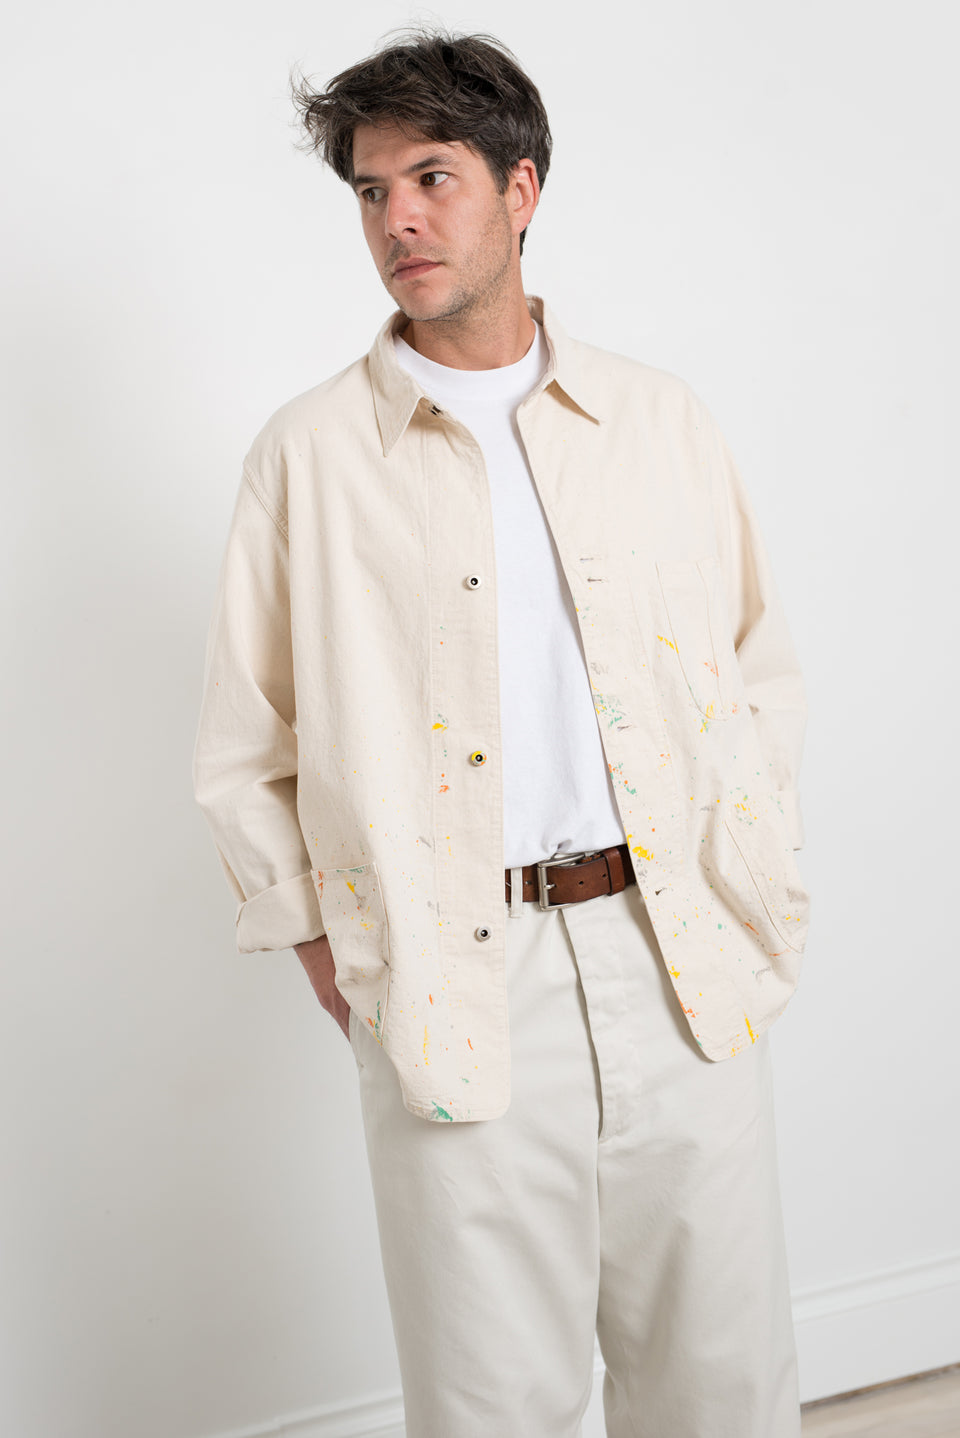 OrSlow 23SS SS23 01-6150-P66 1940's Coverall Jacket w/ Paint Ecru Calculus Victoria BC Canada